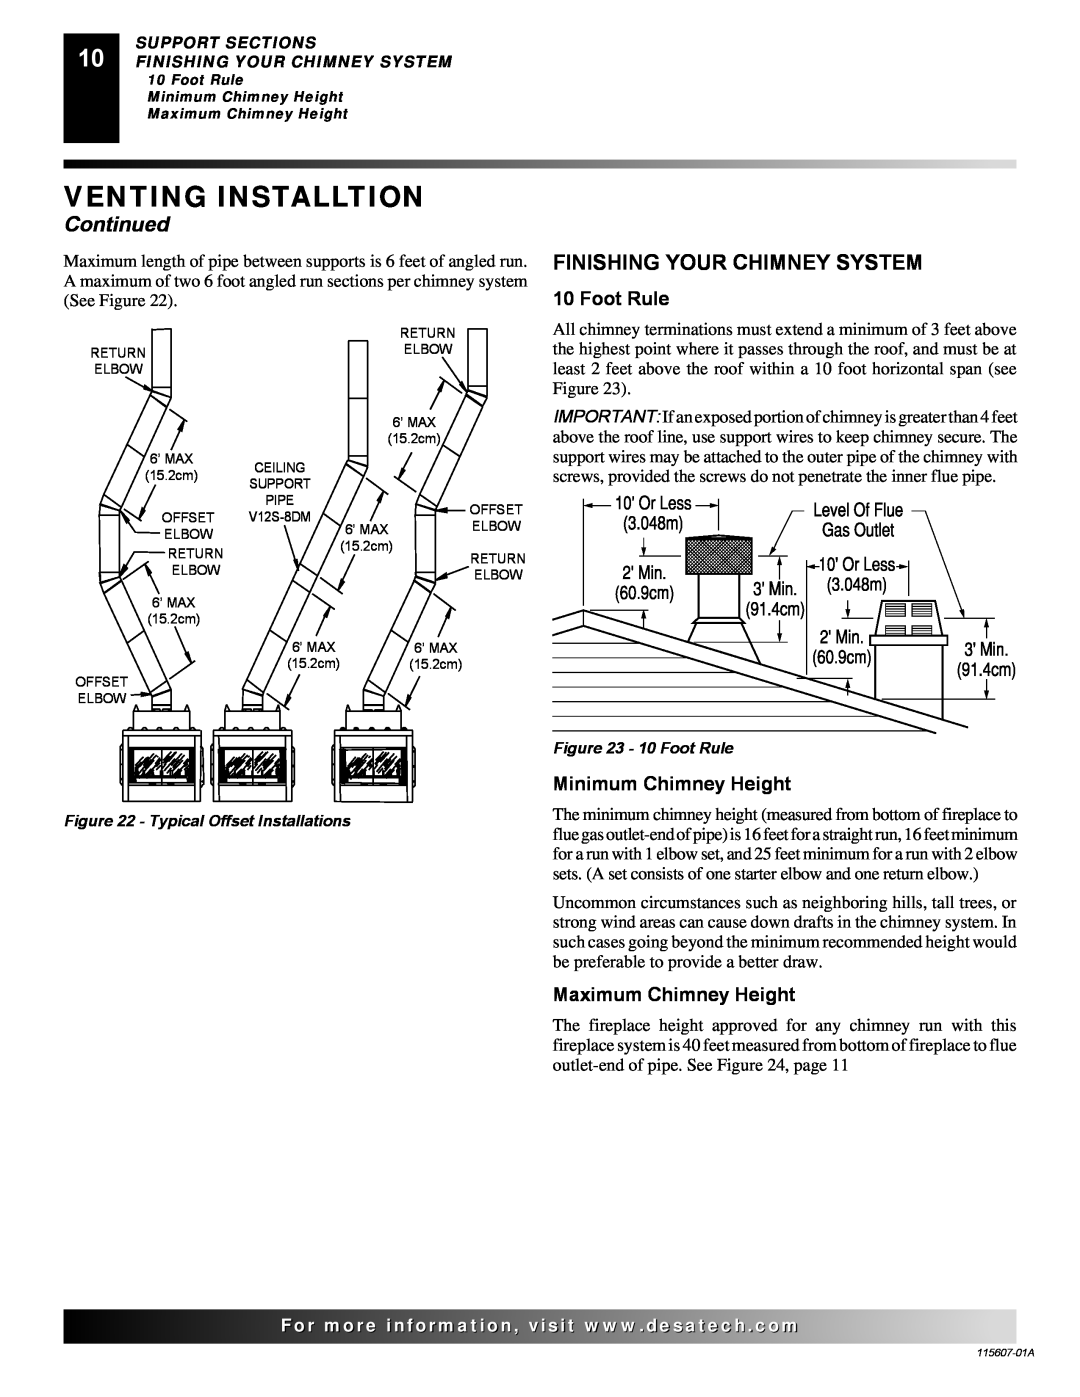 Desa (V)PN36-A manual Venting Installtion, Continued, Finishing Your Chimney System, Foot Rule, Minimum Chimney Height 